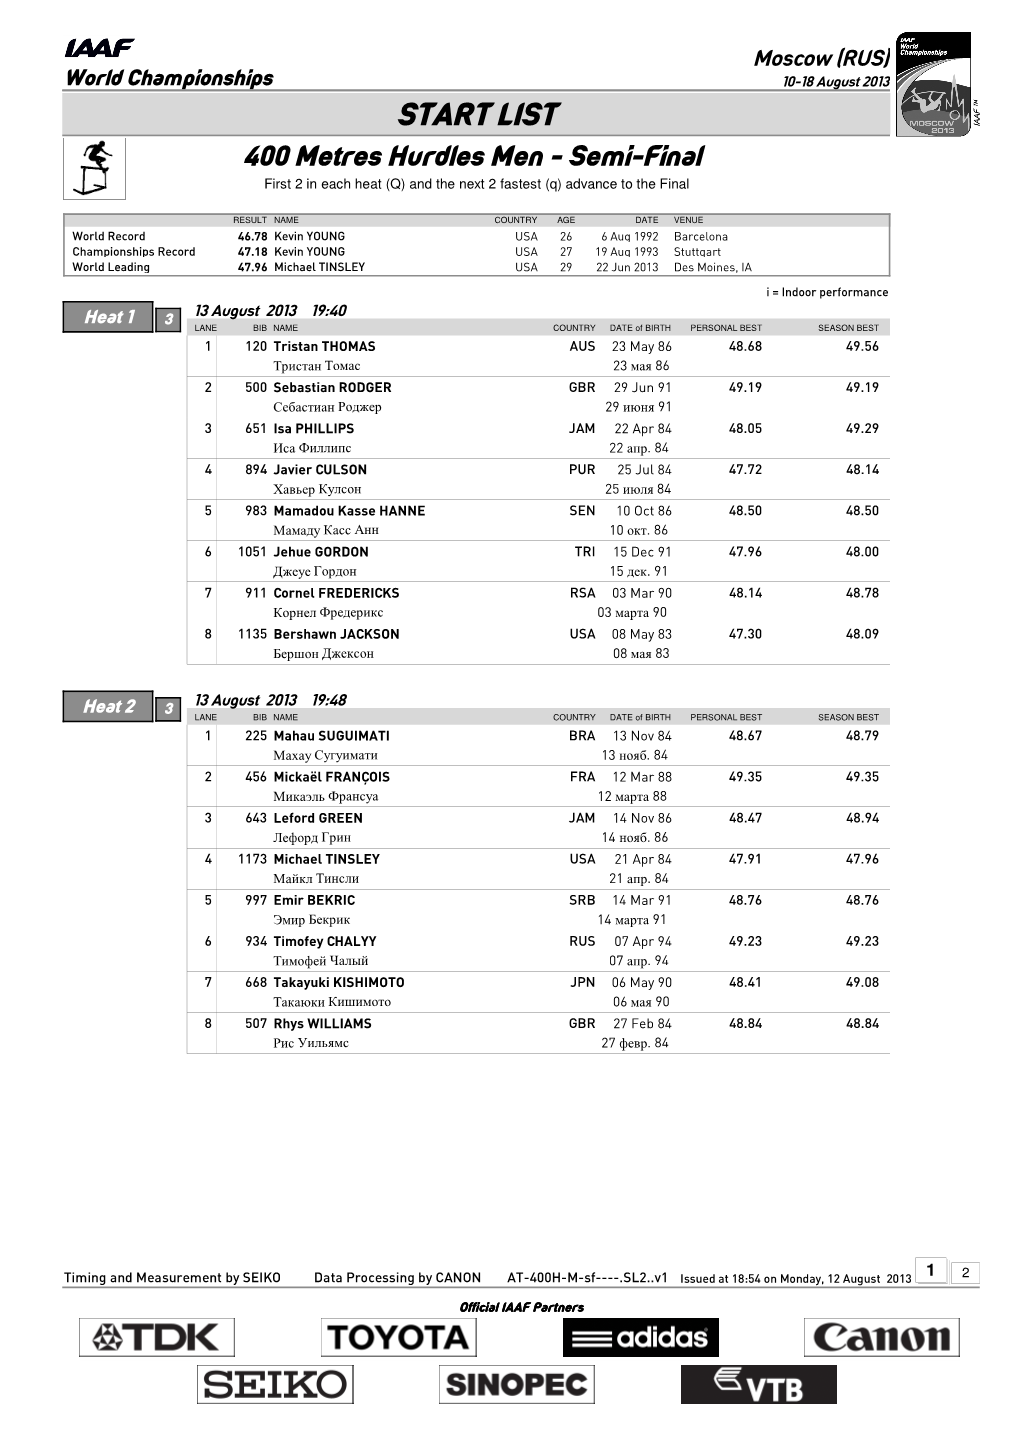 START LIST 400 Metres Hurdles Men - Semi-Final First 2 in Each Heat (Q) and the Next 2 Fastest (Q) Advance to the Final